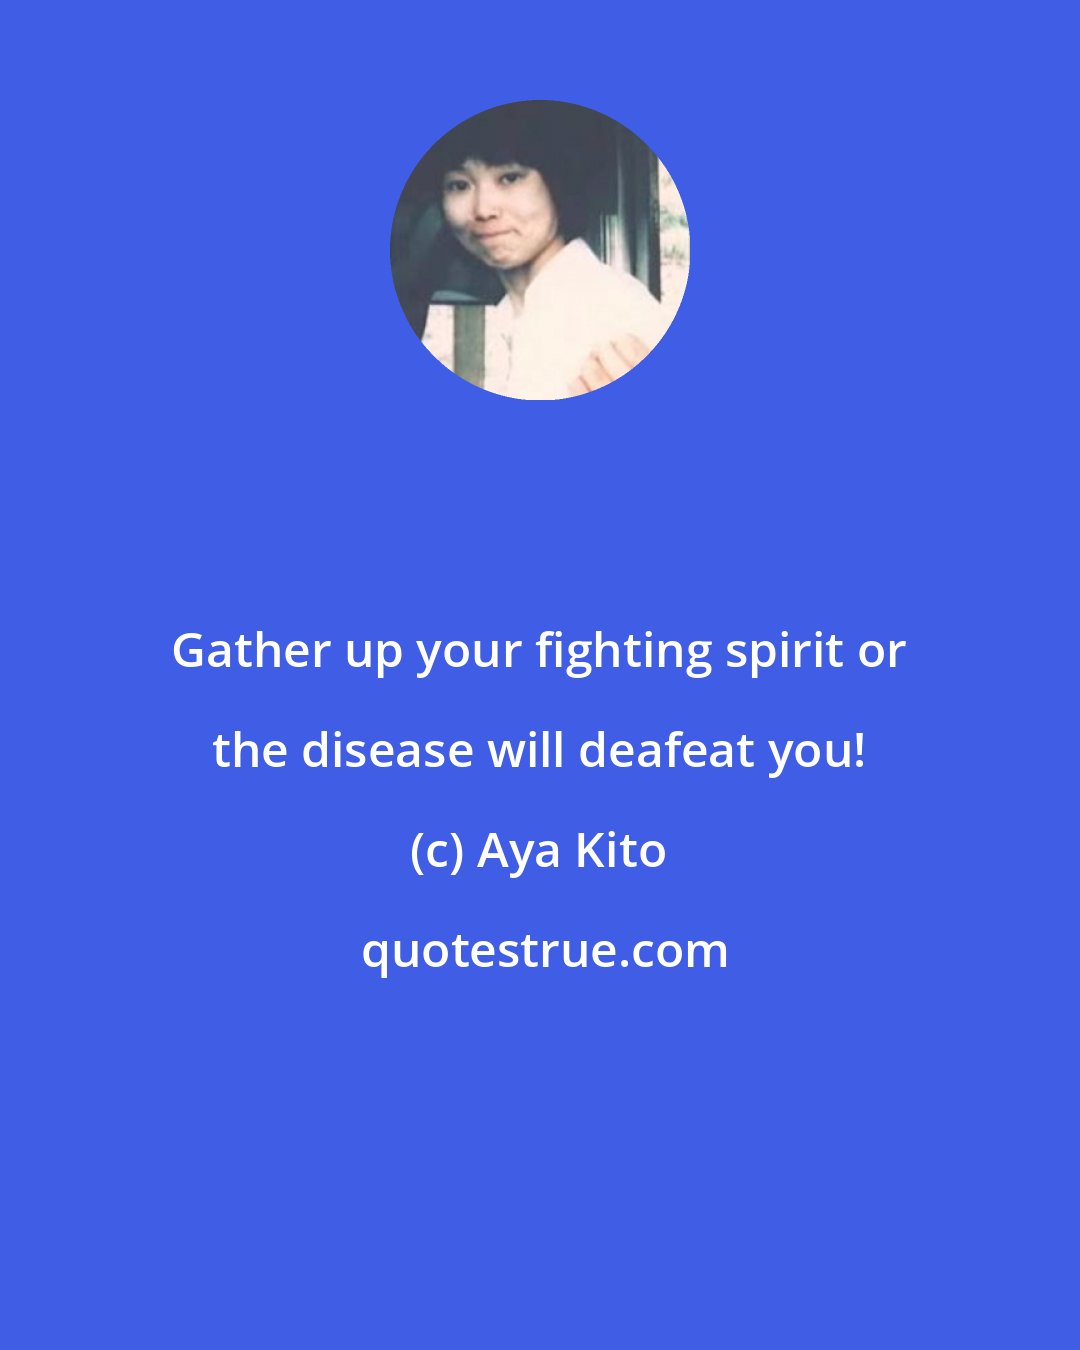 Aya Kito: Gather up your fighting spirit or the disease will deafeat you!